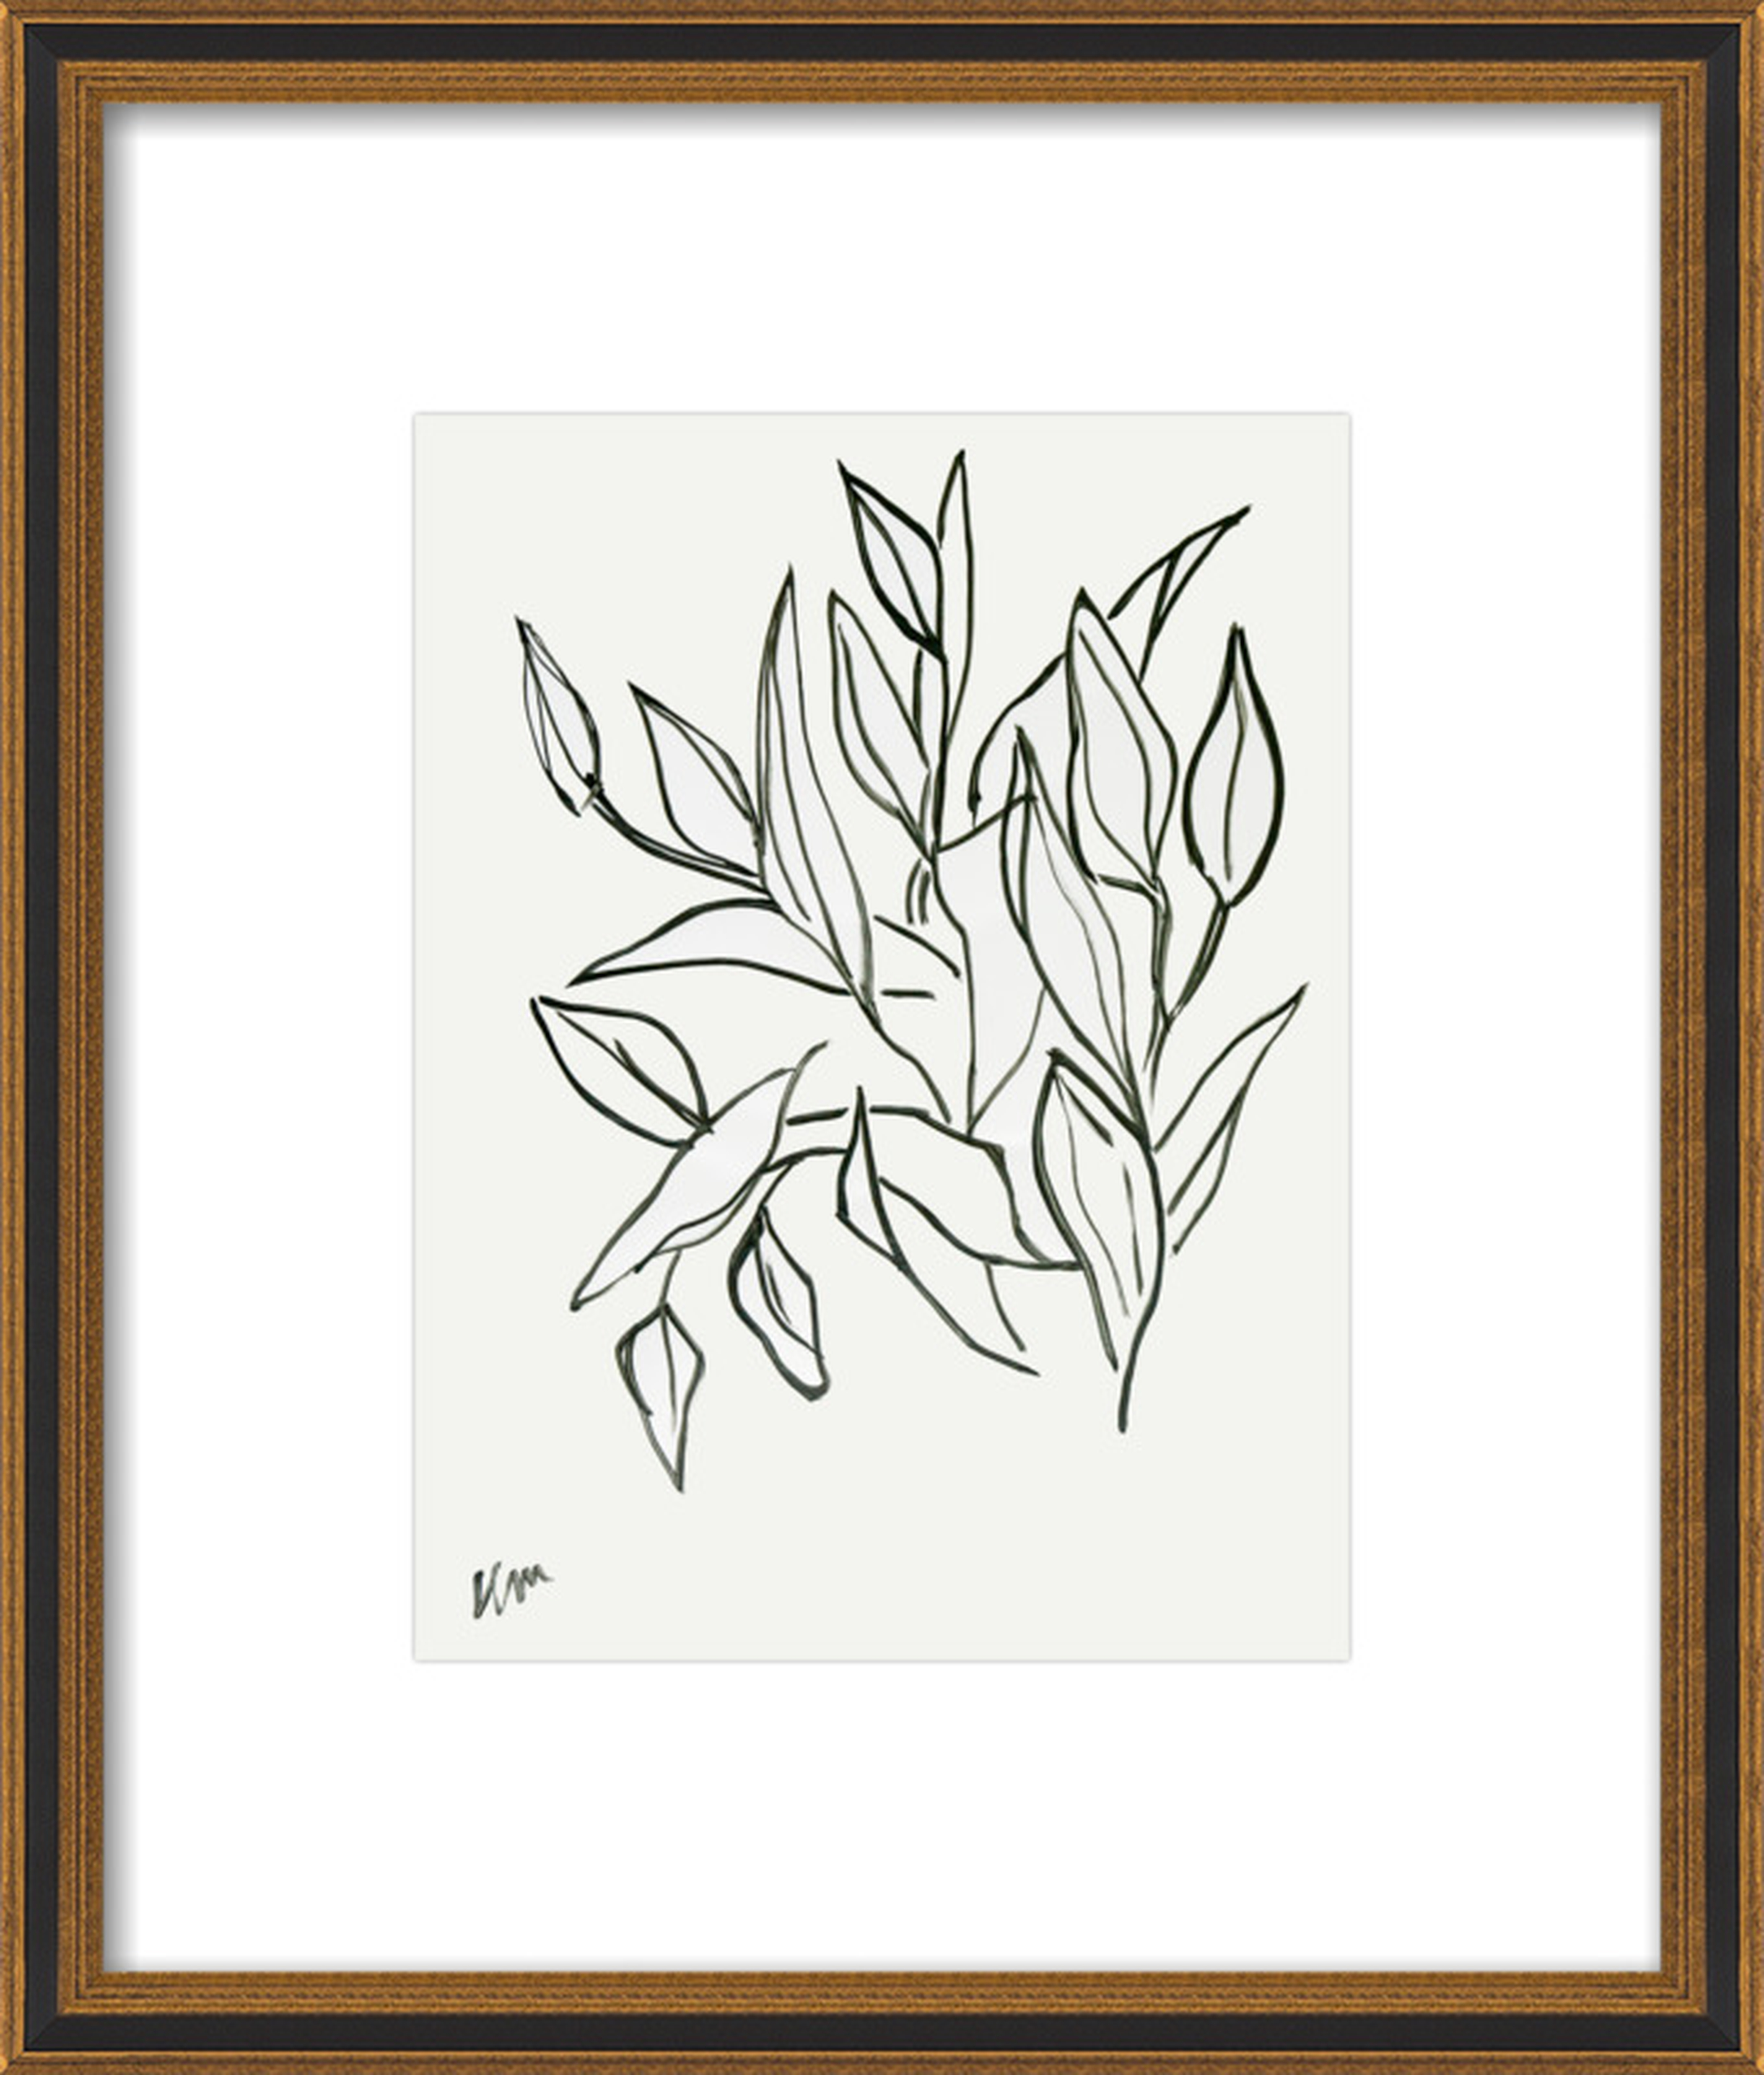 Lilies_with matte_FINAL:16.5x19.5" - Artfully Walls